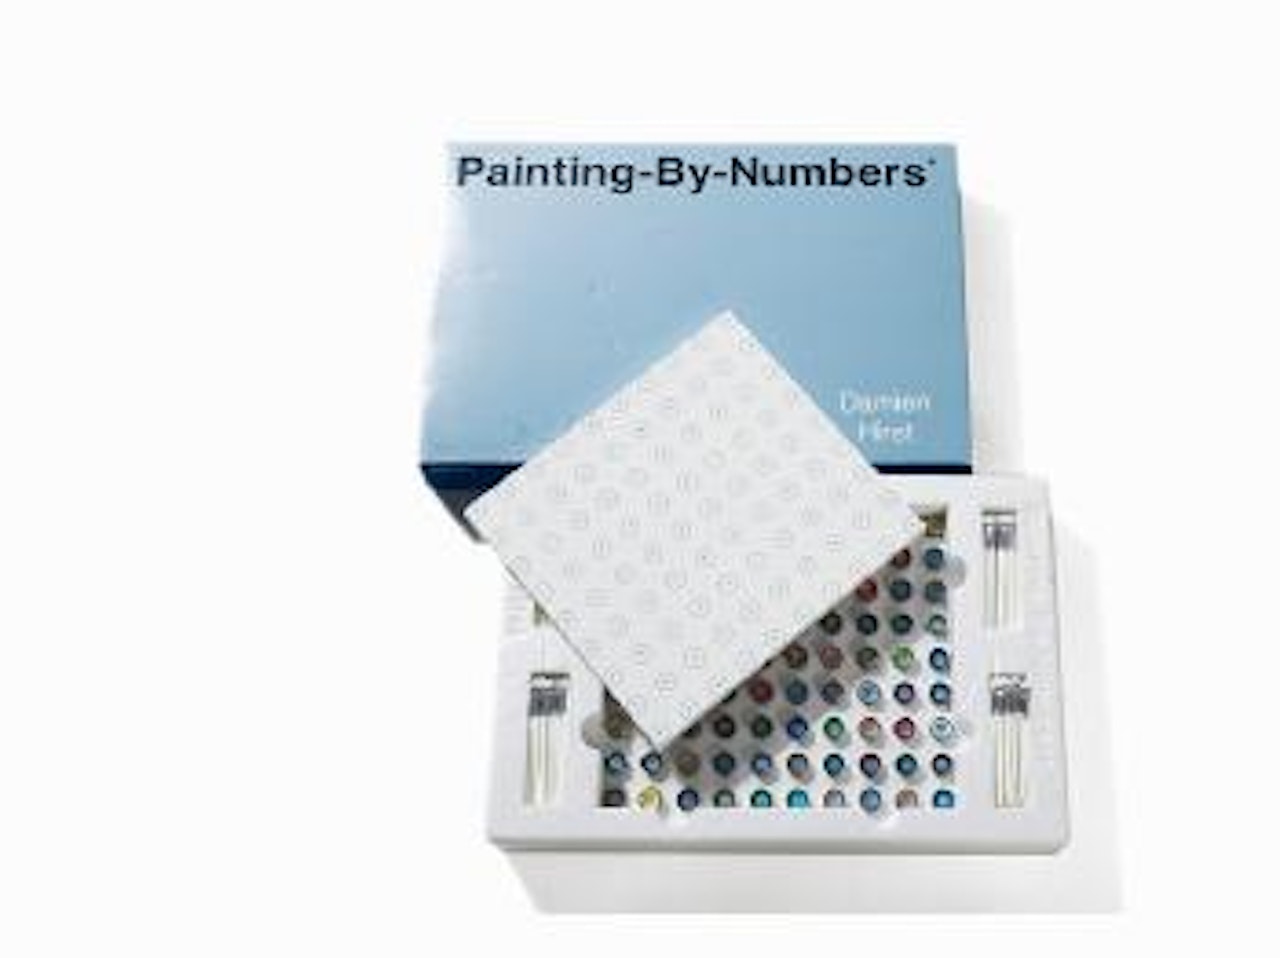 Painting-by-numbers (Blue) by Damien Hirst